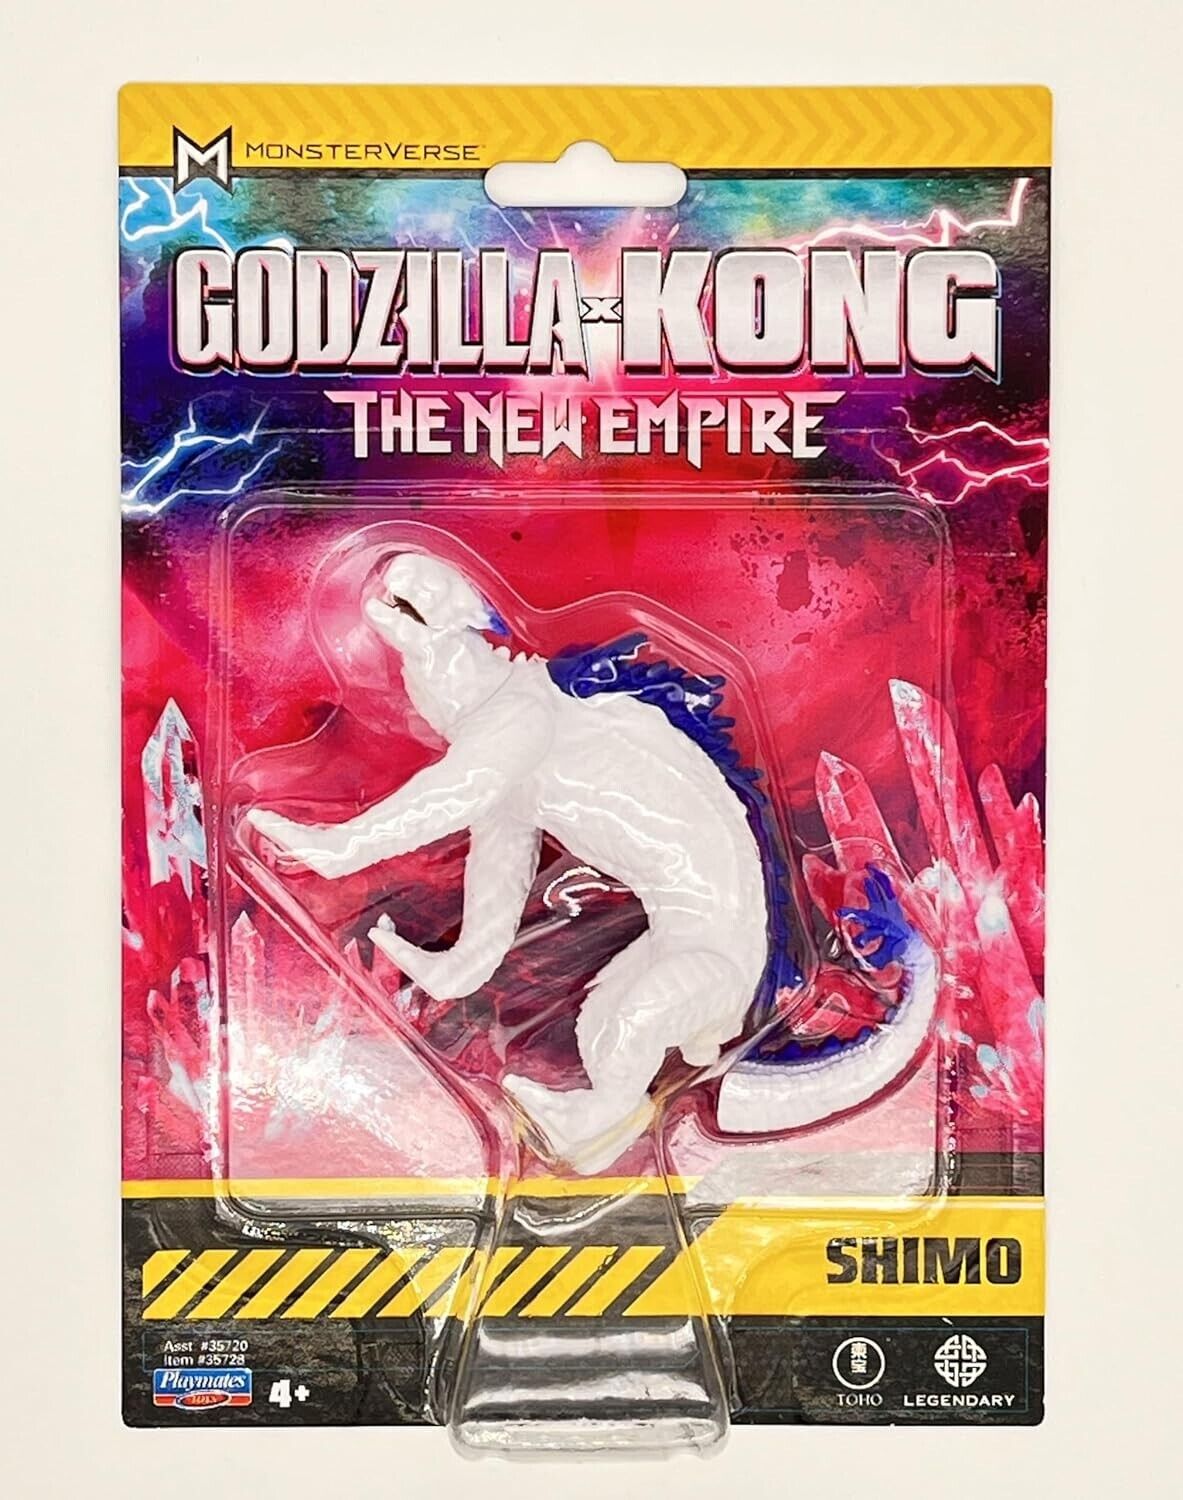 MonsterVerse Godzilla x Kong: The New Empire, 3.25 Inch Shimo Action Figure Toy,